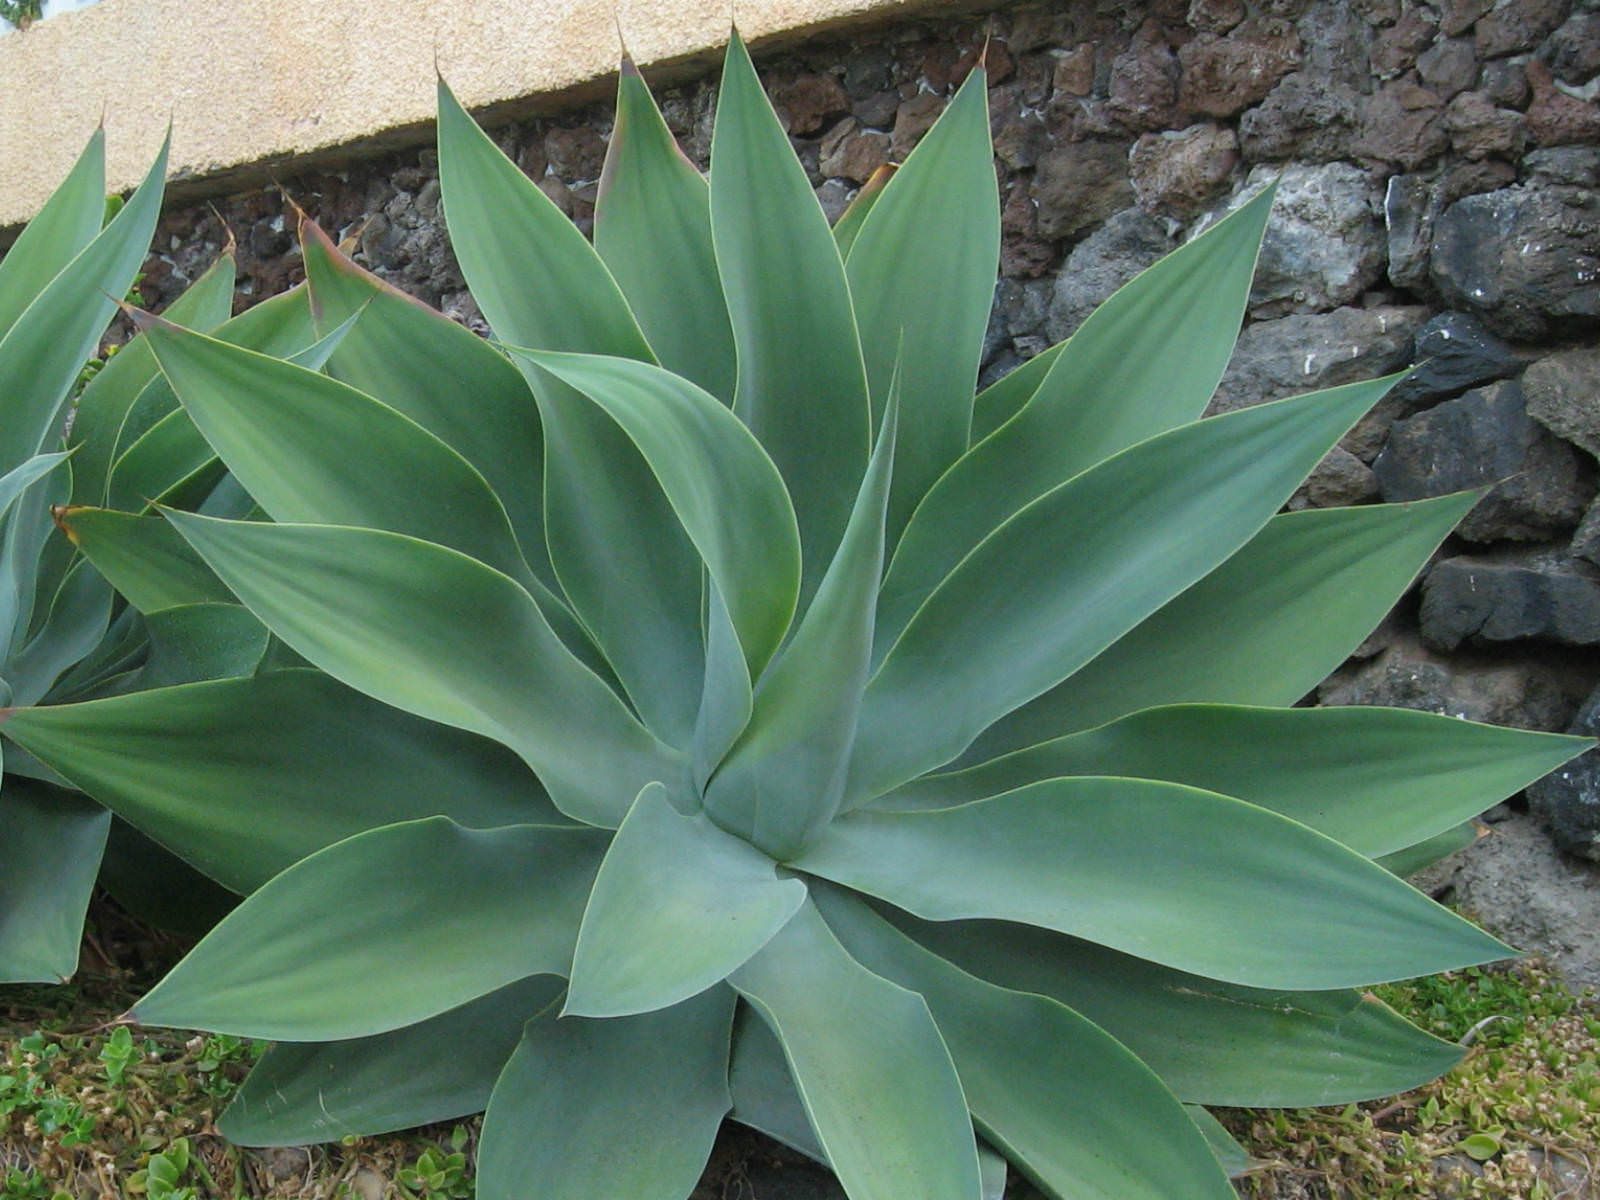 Top 12 Succulents for Home Gardens World of Succulents